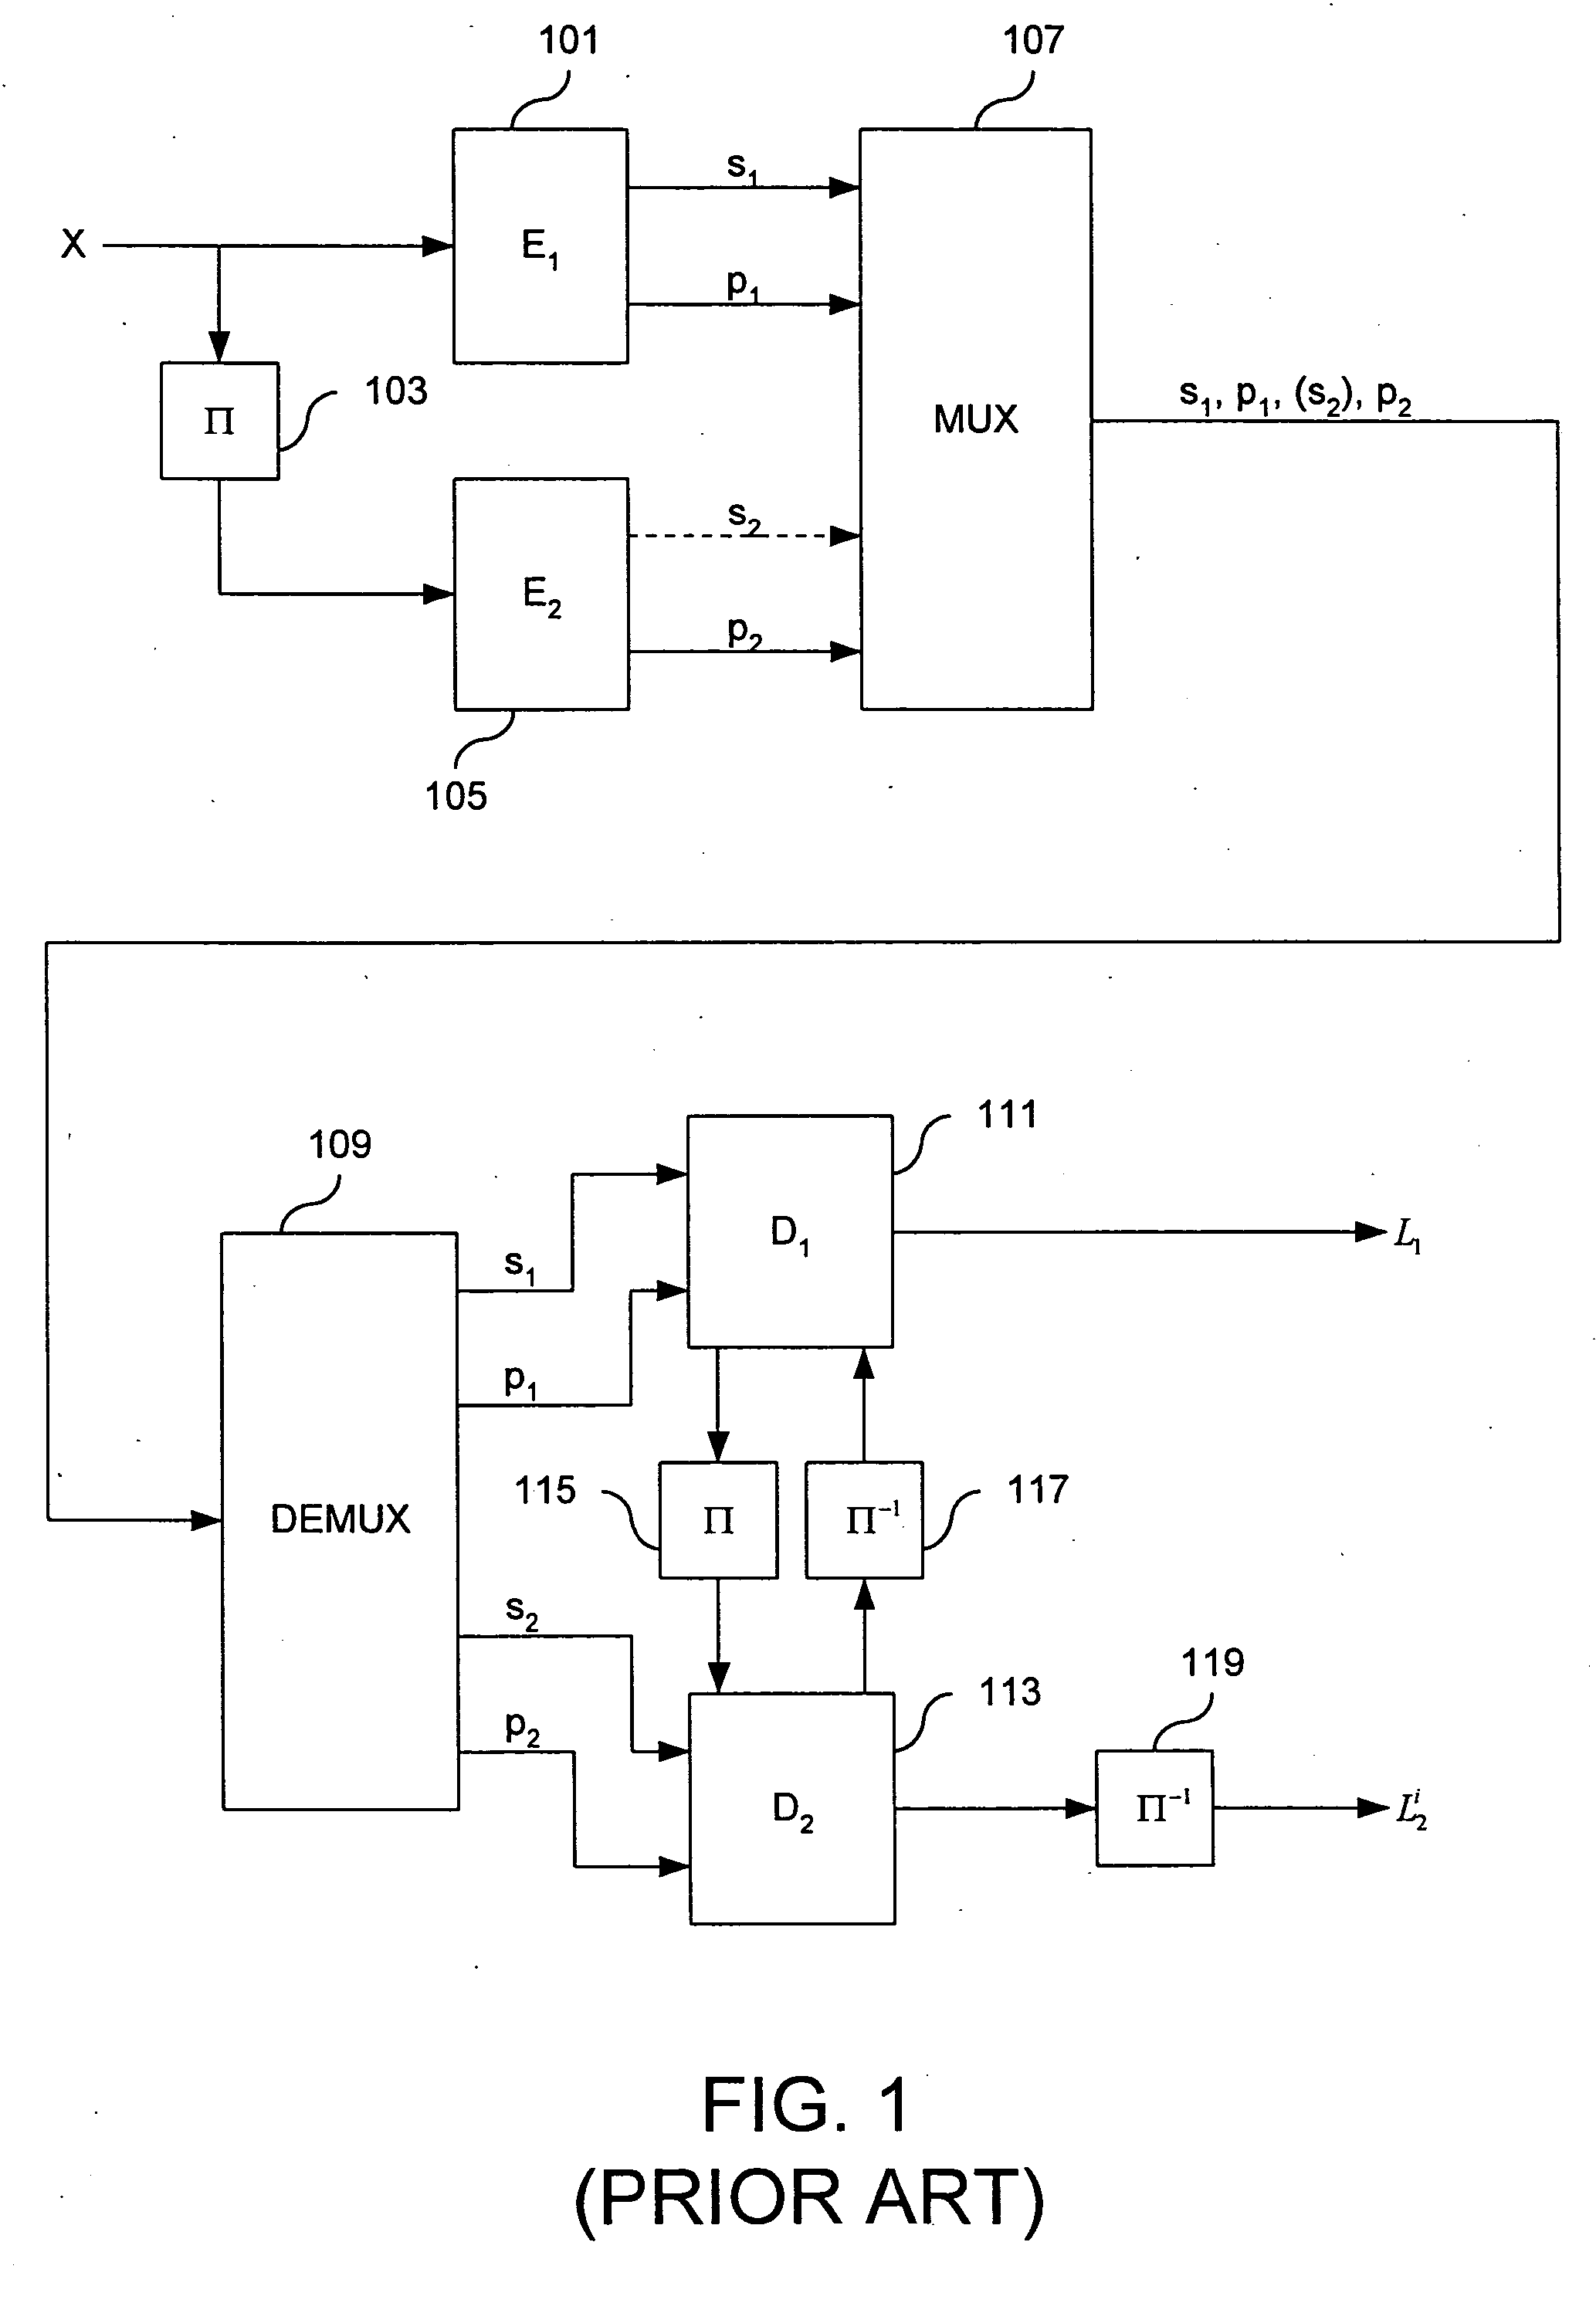 Fast iteration termination of Turbo decoding